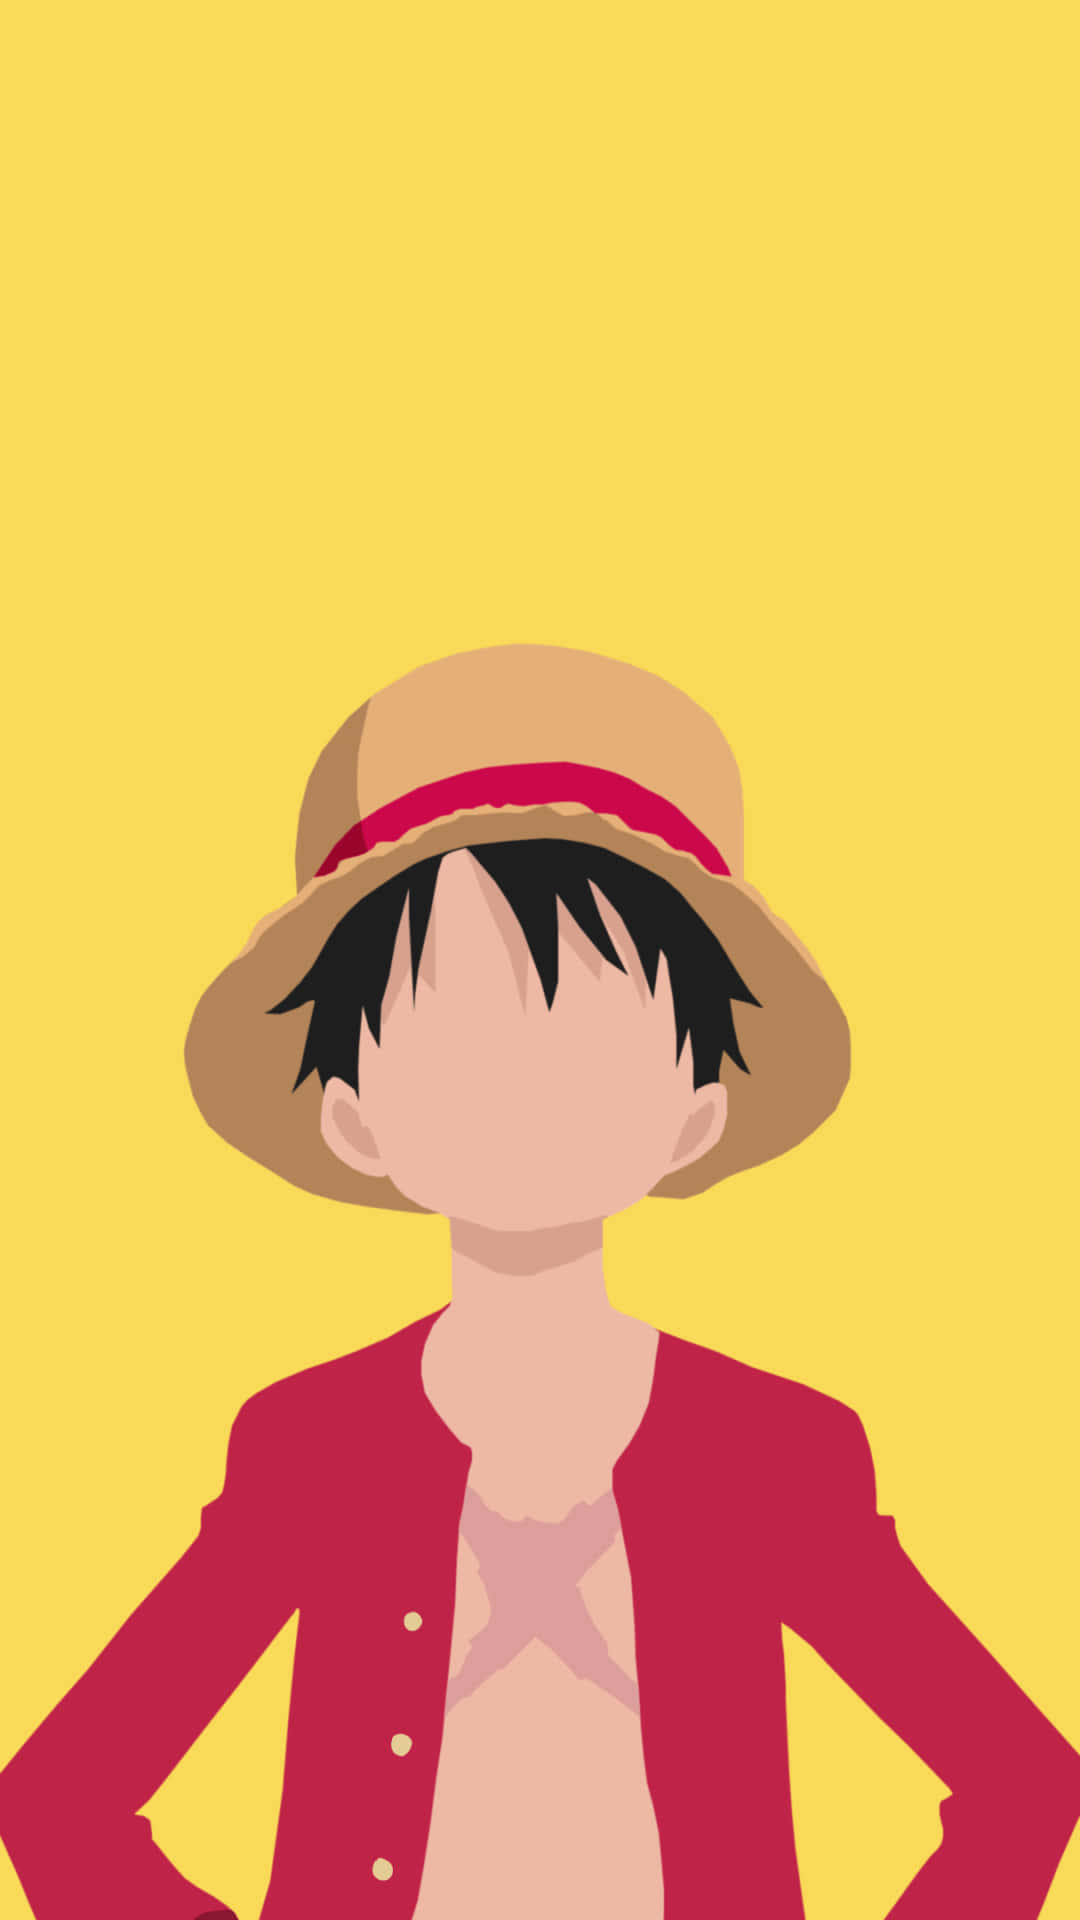 Download Modest One Piece Coloring Pages Monkey D Luffy Pinterest